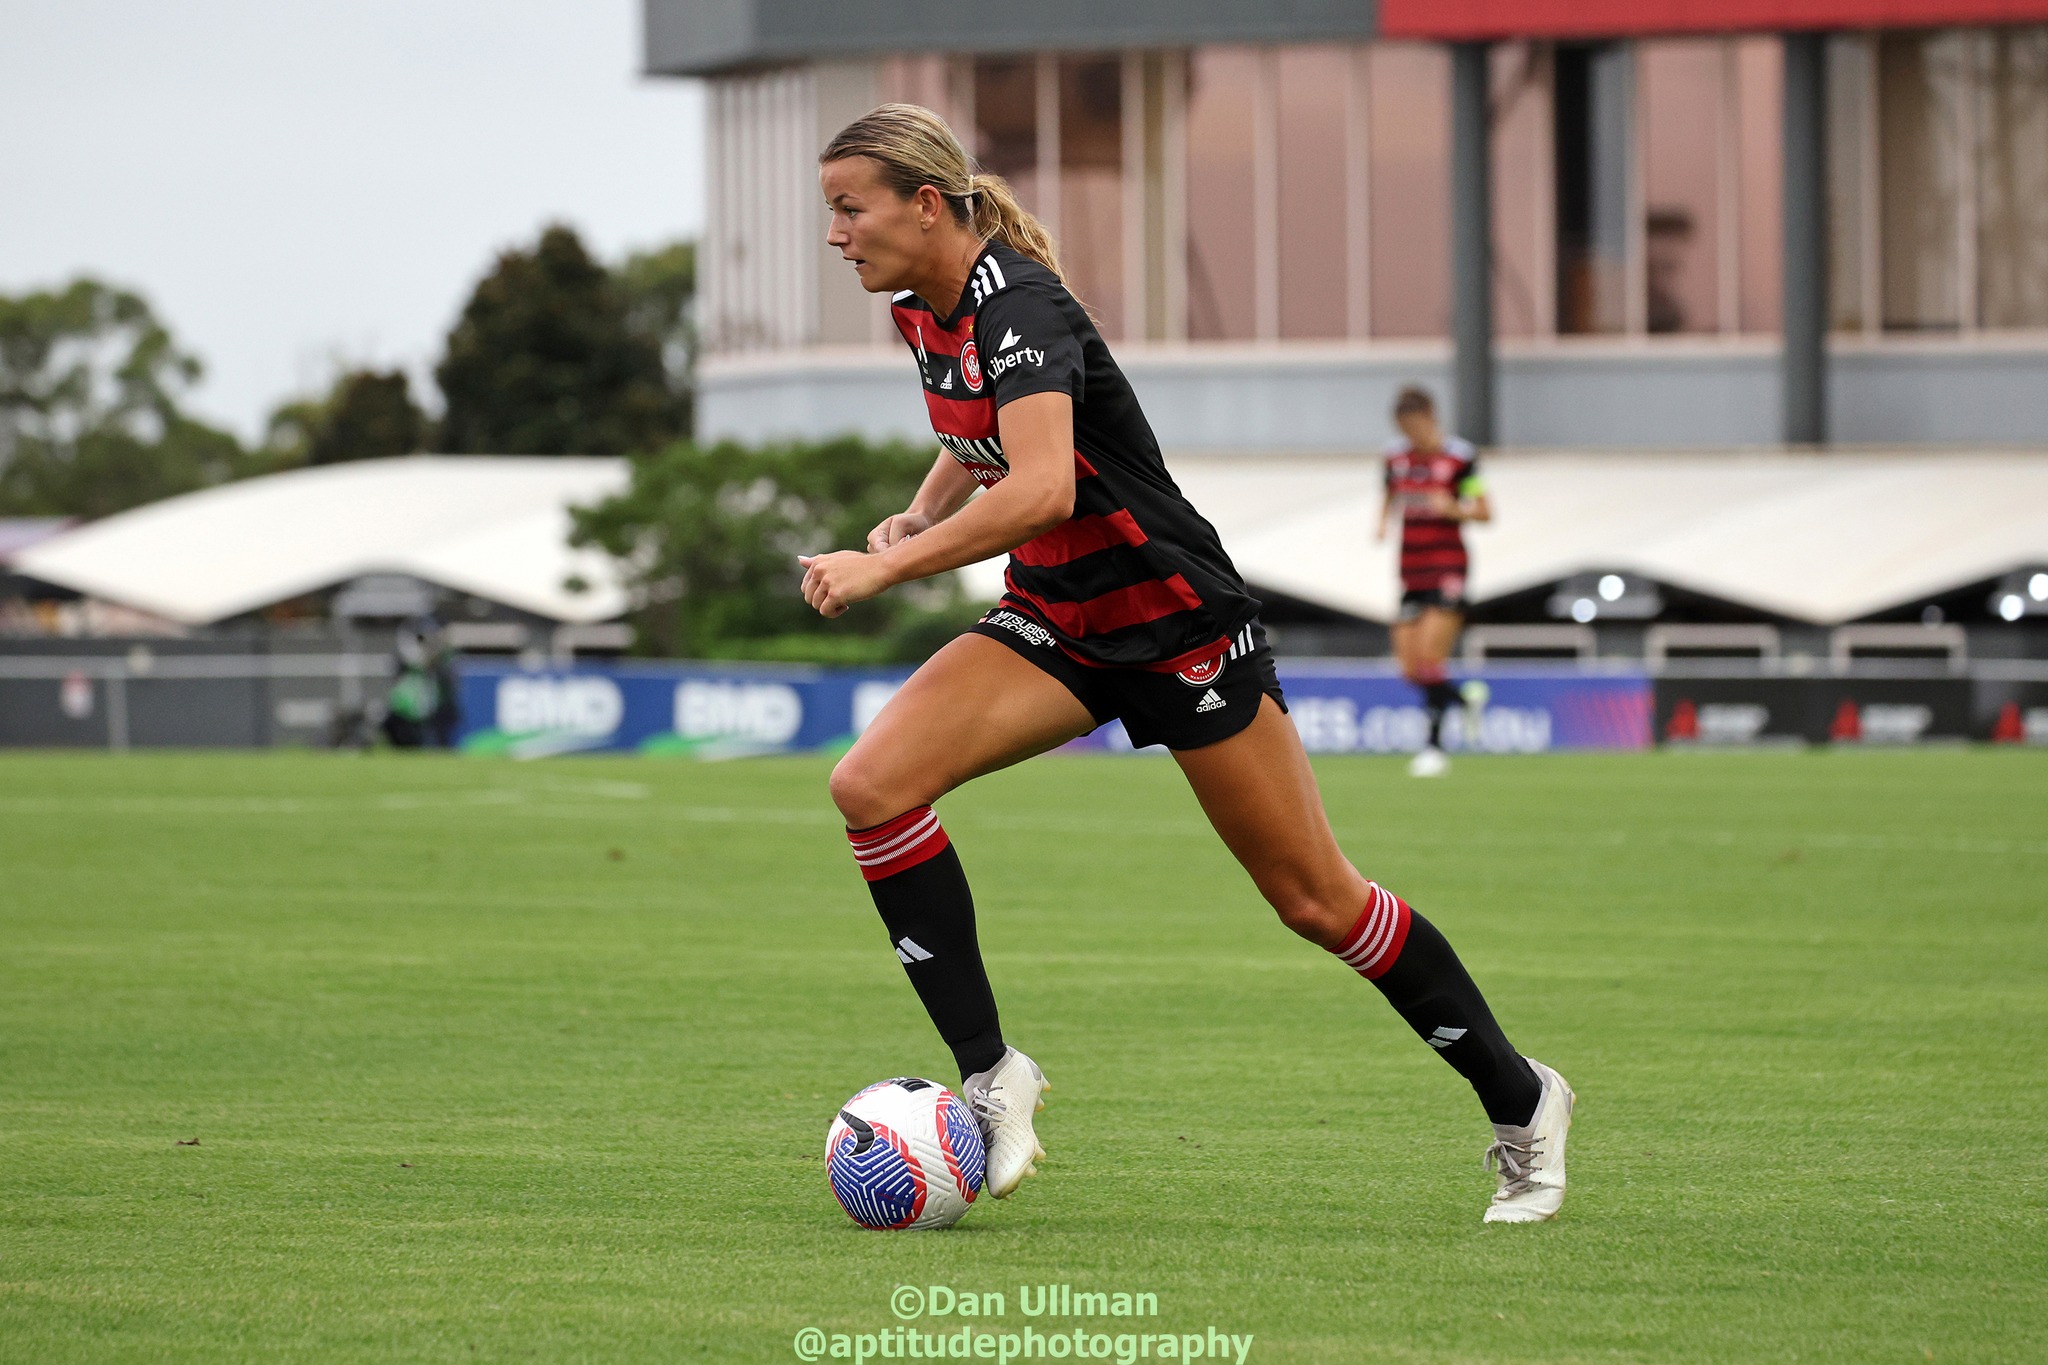 Sophie Harding runs with the ball during the 2023-24 A-League Women game between Western Sydney Wanderers and Brisbane Roar, played at Marconi Stadium on January 27, 2024. Photo credit: Dan Ullman (Instagram - @aptitudephotography)